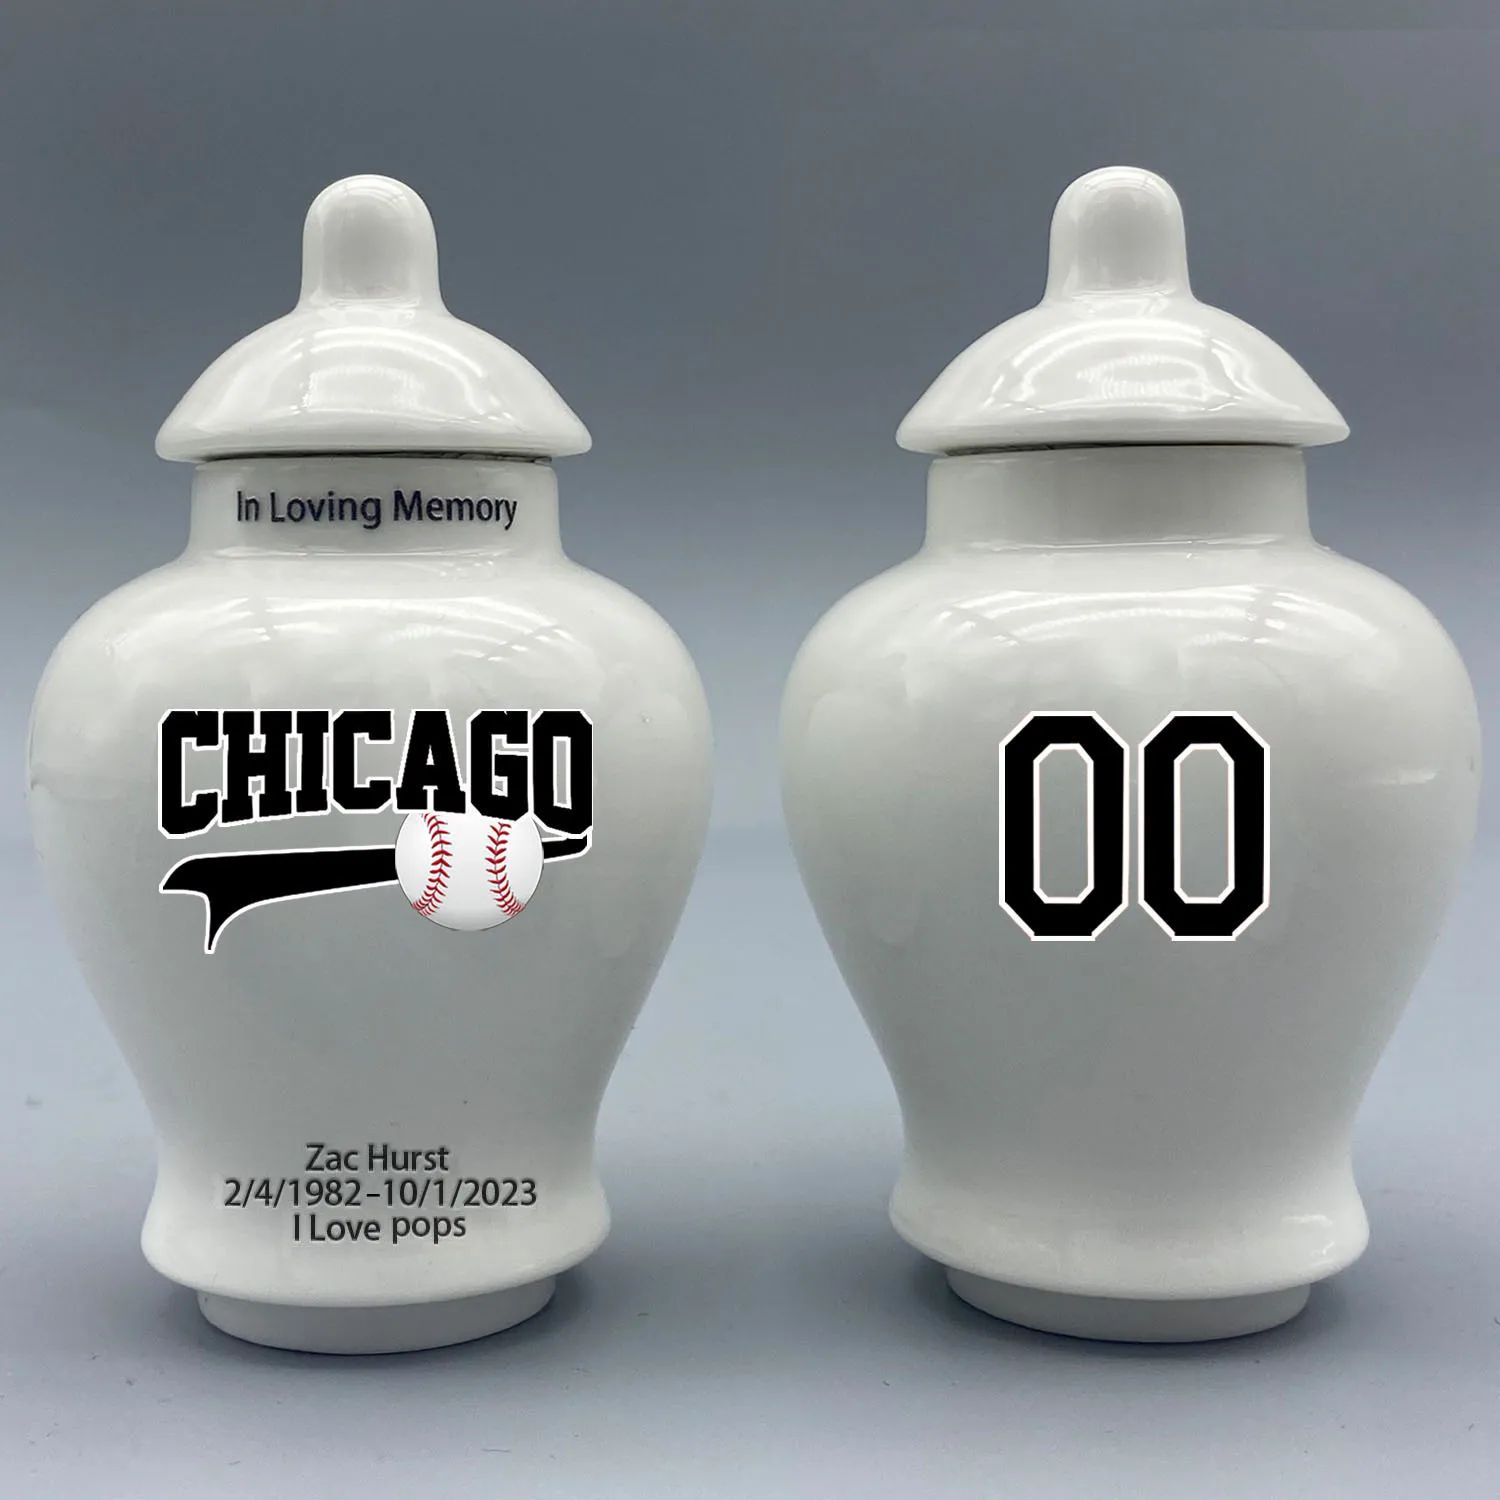 

Mini Urn for Chicago White Sox-Baseball themed.Please send me the customization information - name/date and number on the urn